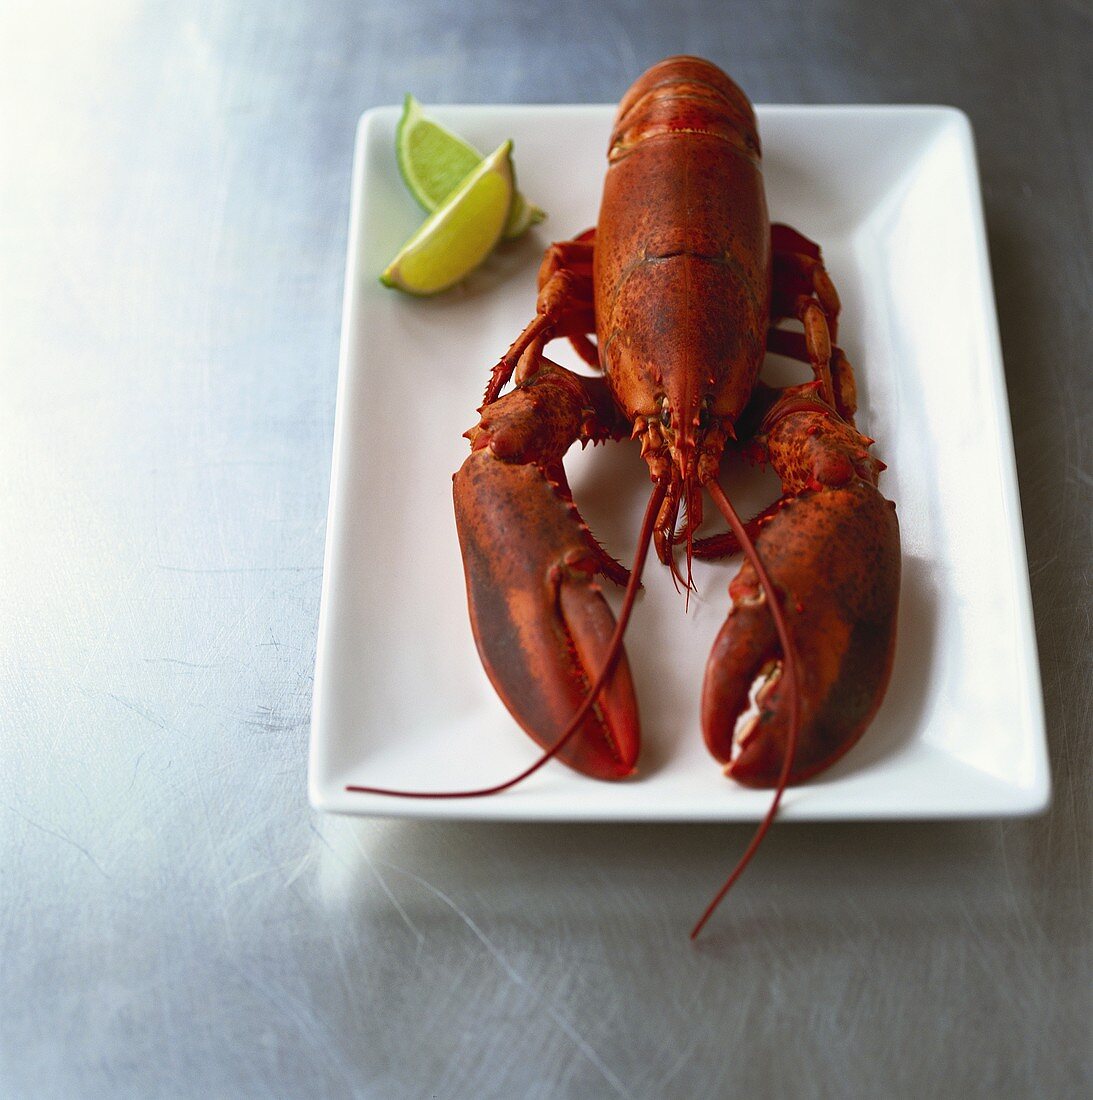 Cooked lobster with wedges of lime